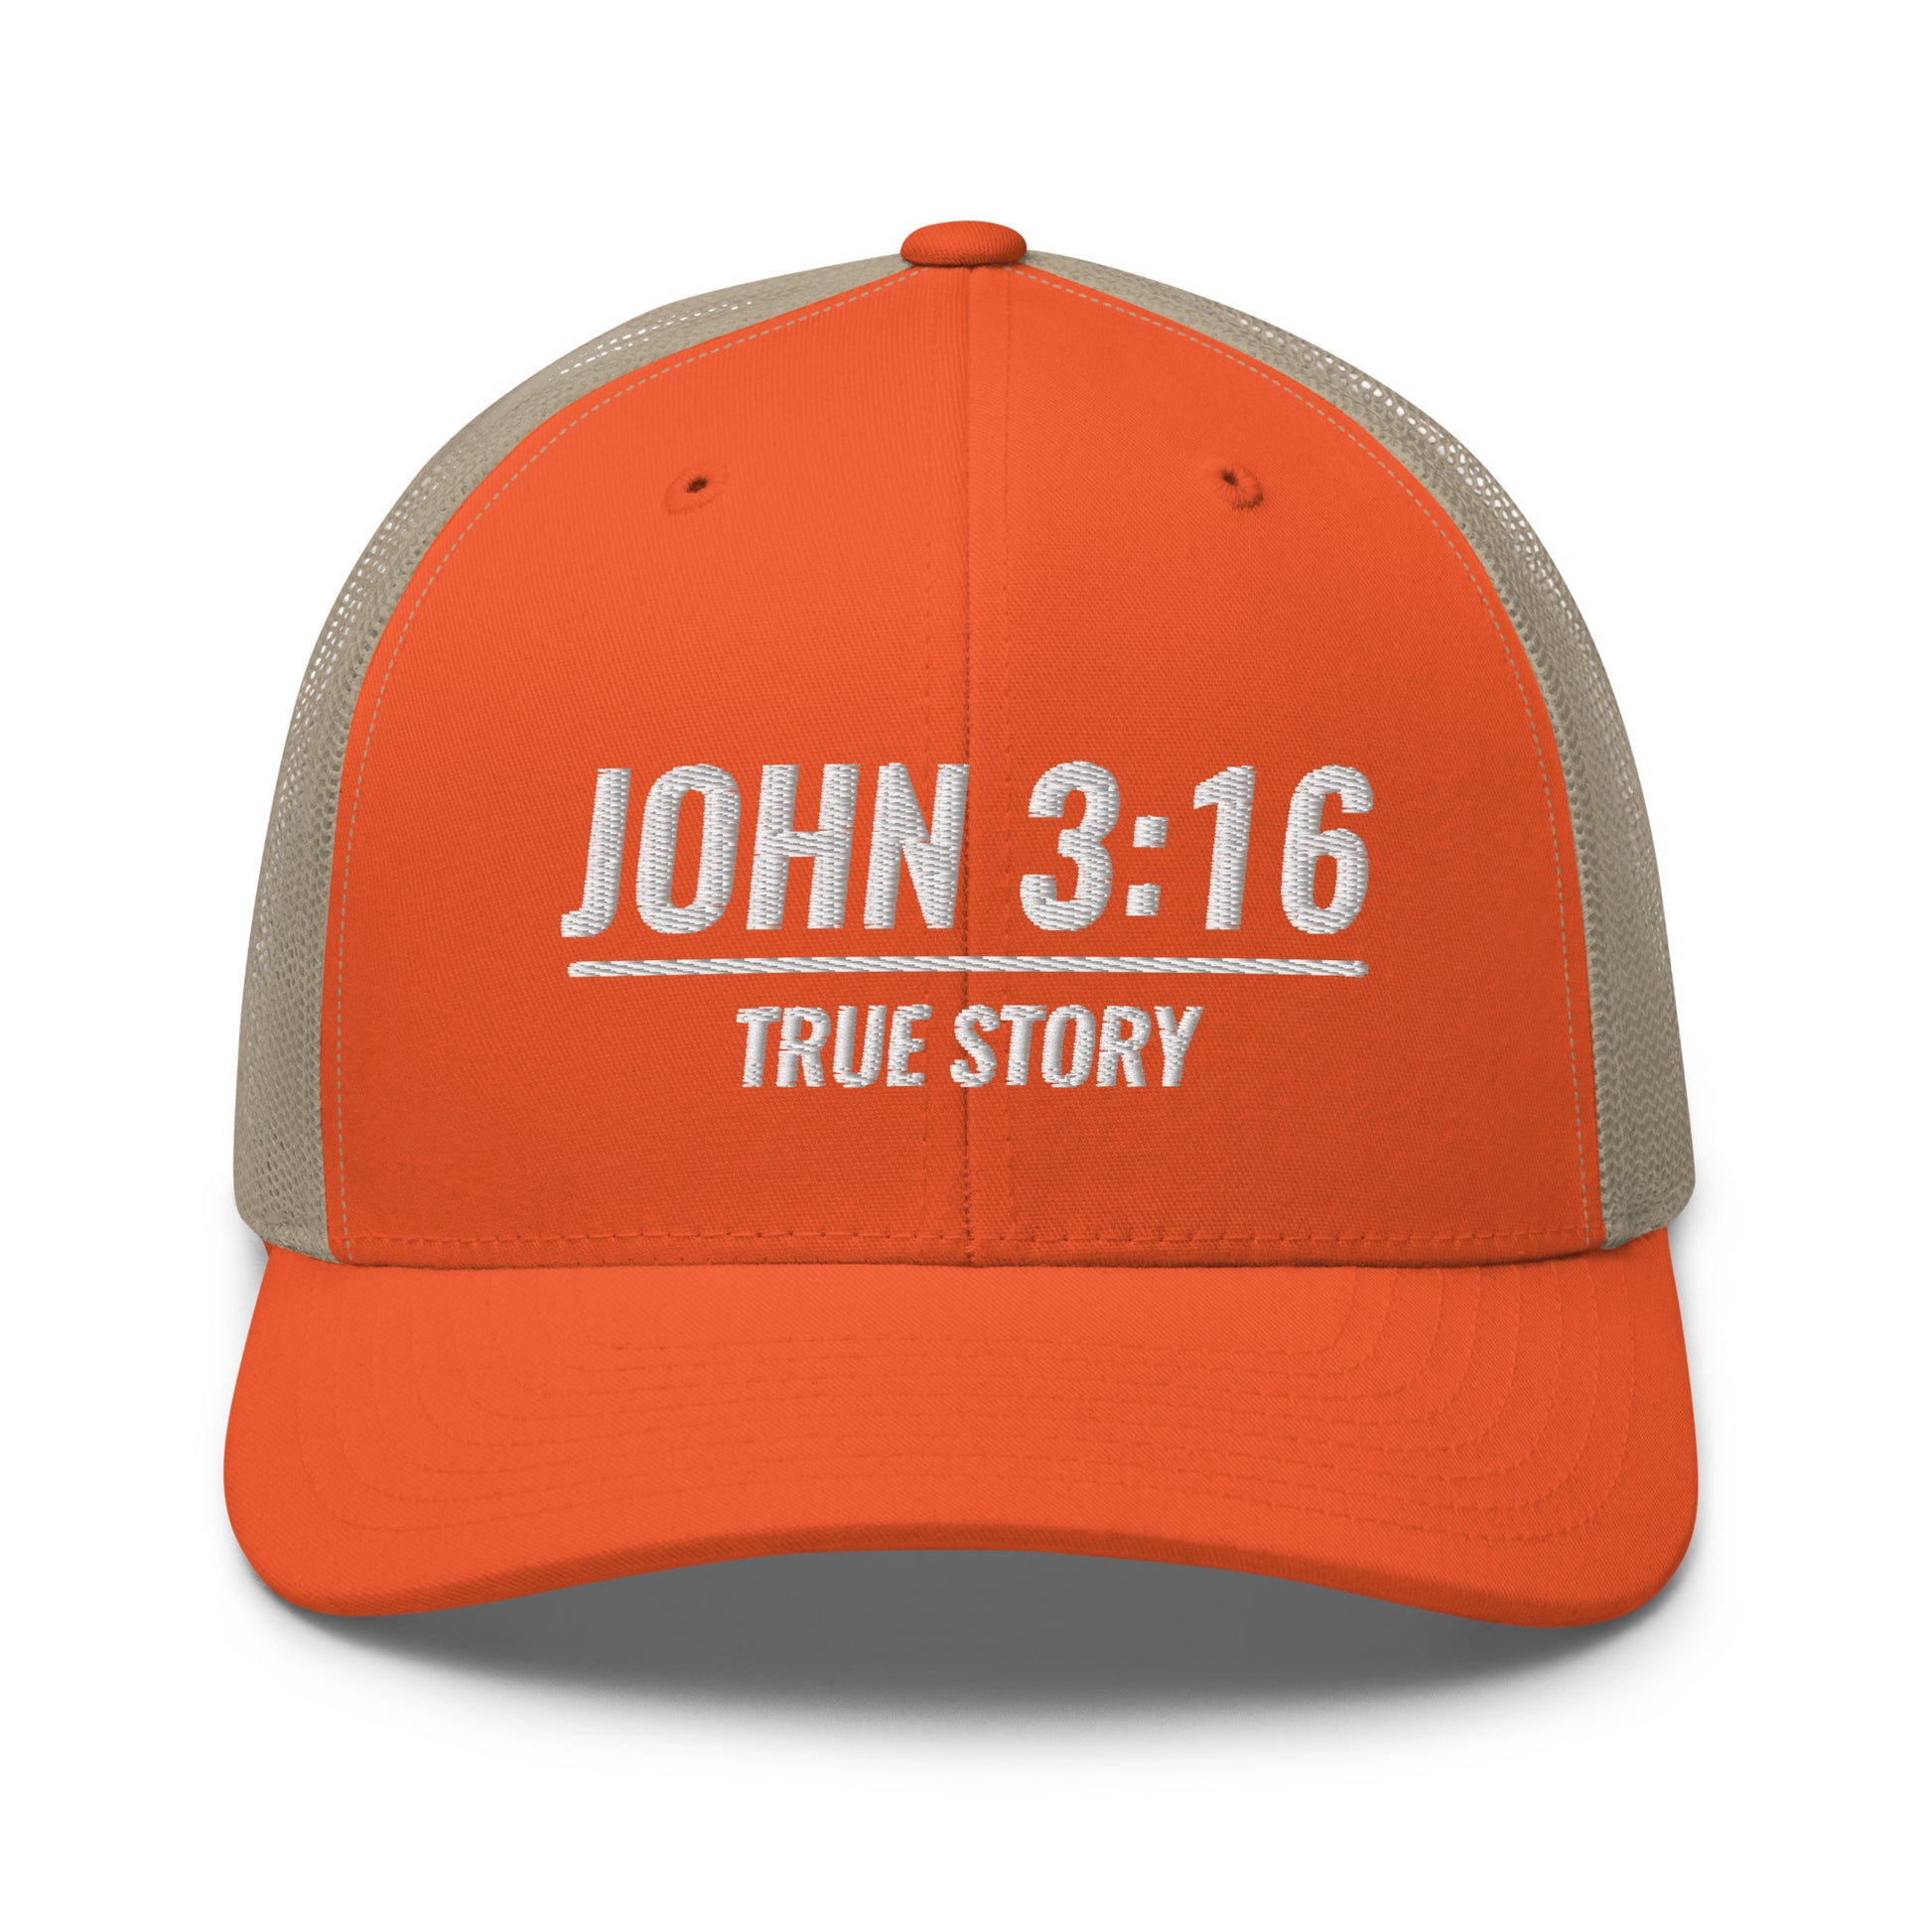 John 3:16 True Story Hat.  A orange and beige Yupoong 6606 hat with John 3:16 True Story embroidered on front of hat.